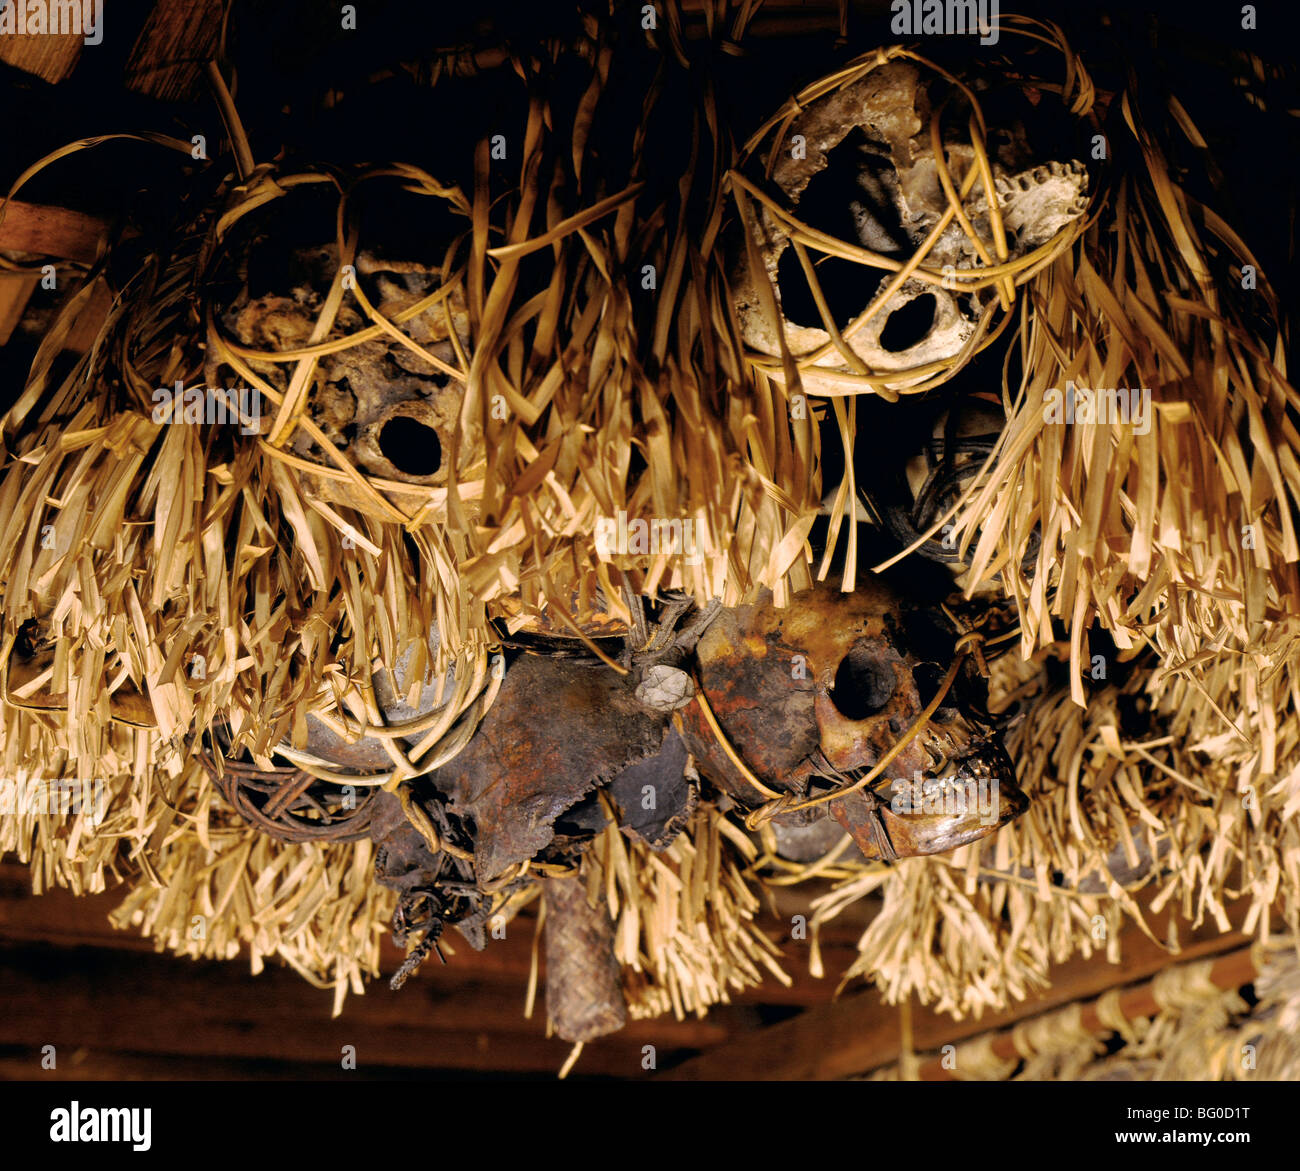 Trophy skulls from headhunting hang on display in a Longhouse gallery in Sarawak, Borneo, Malaysia, Southeast Asia, Asia Stock Photo